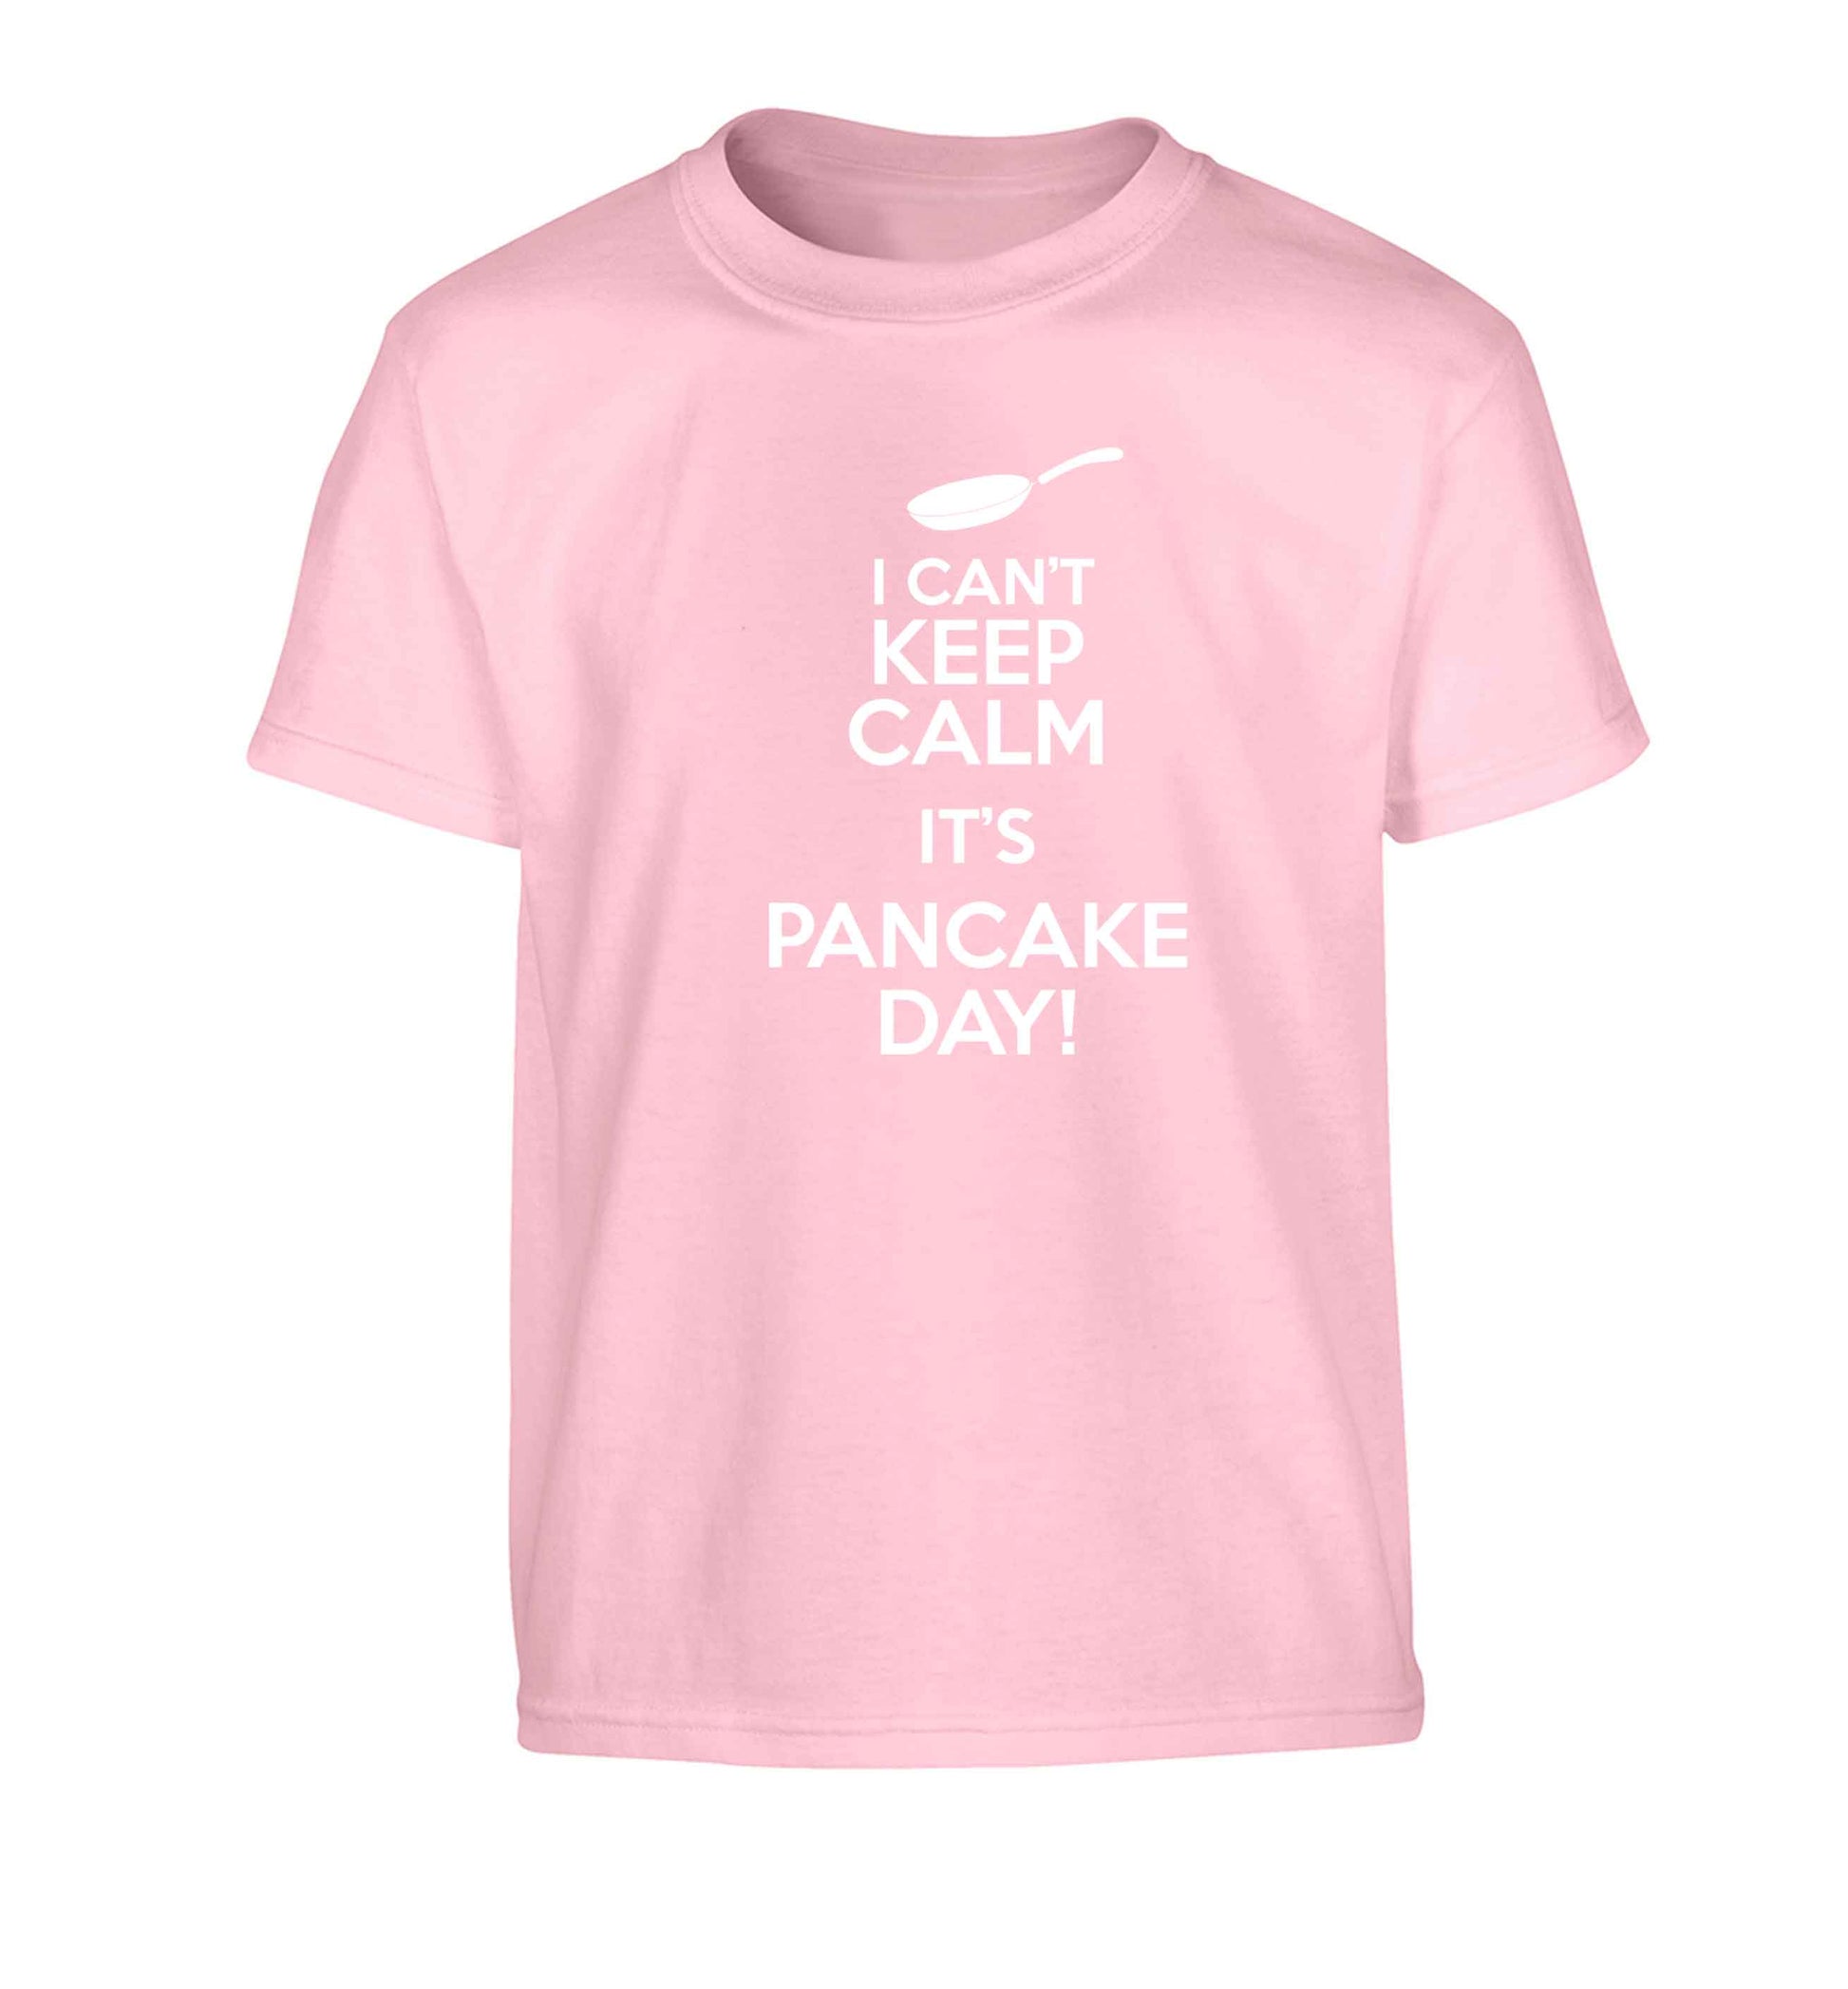 I can't keep calm it's pancake day! Children's light pink Tshirt 12-13 Years